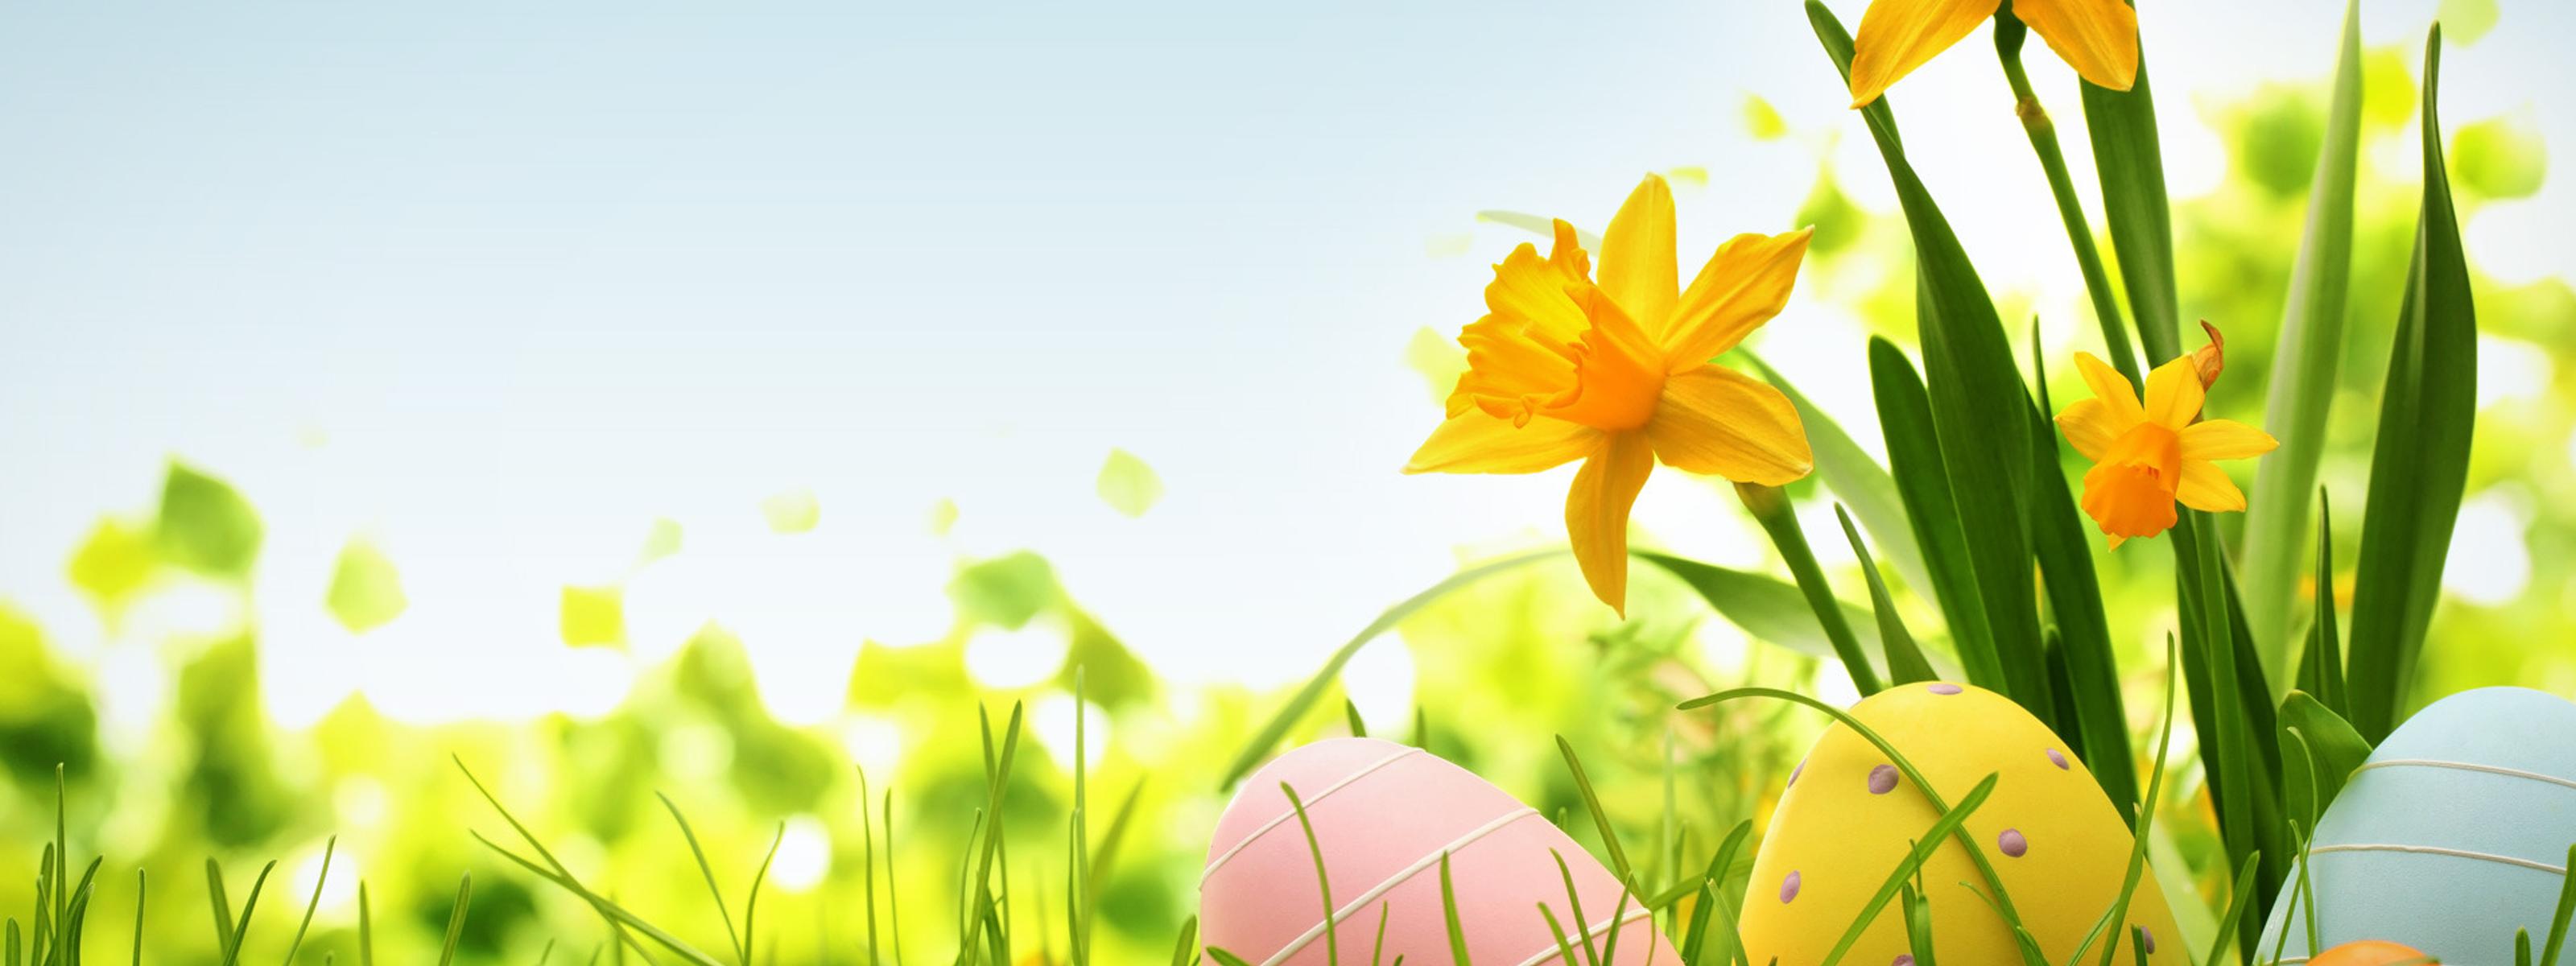 Wonderful yellow spring flower and Easter eggs on the grass